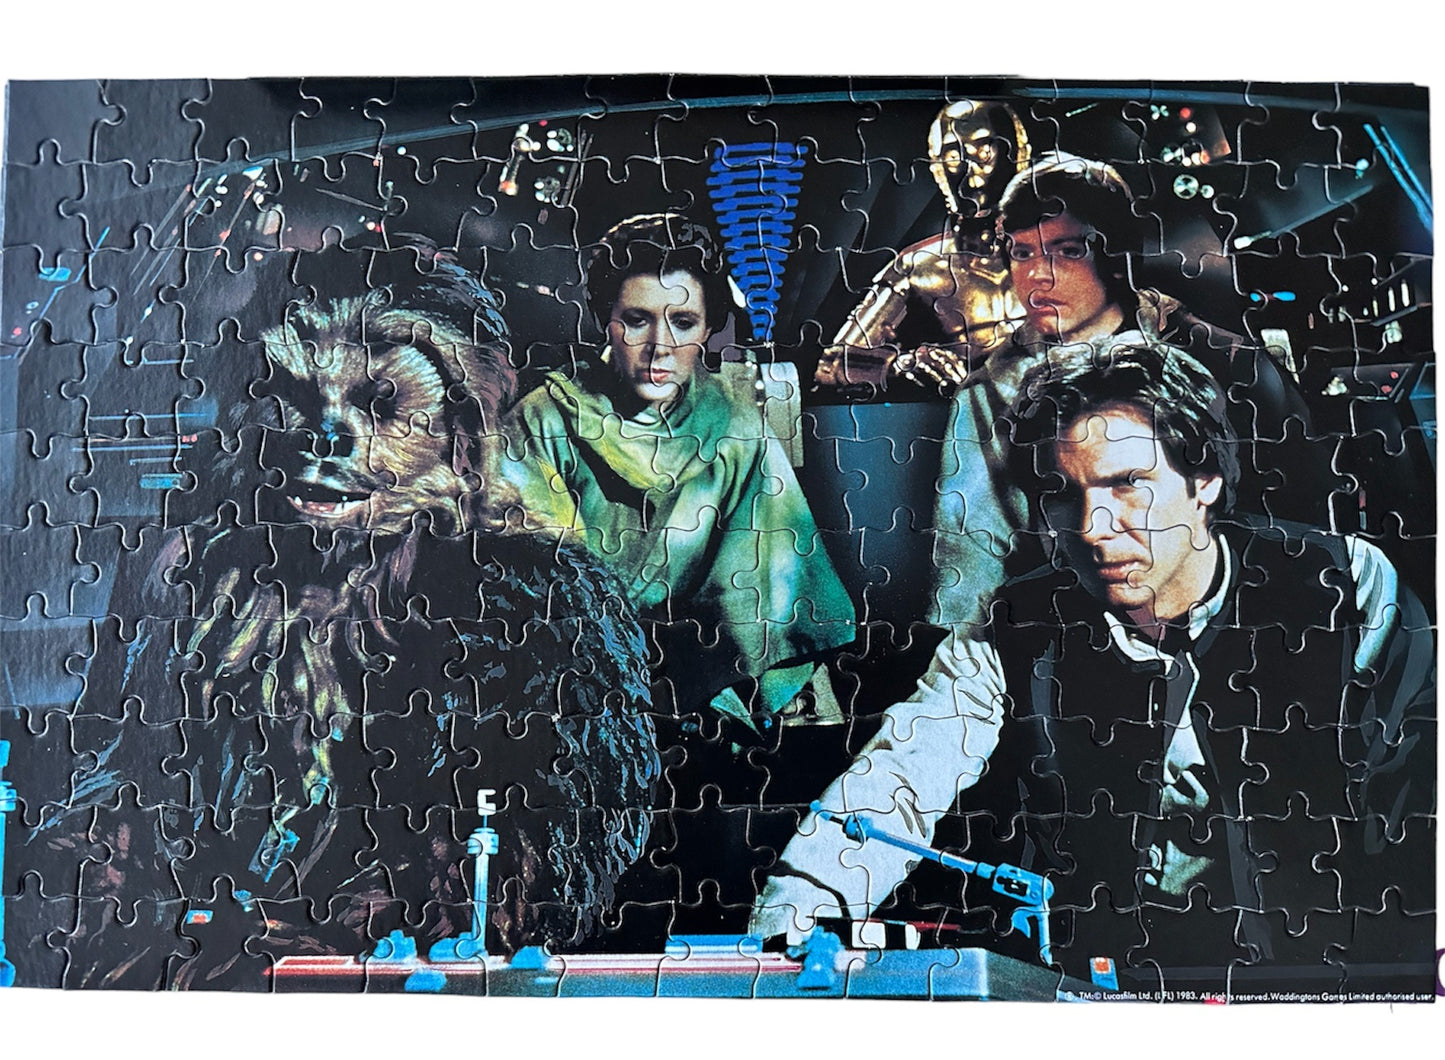 Vintage Waddington 1983 Star Wars Return Of The Jedi - Inside The Cockpit Of The Millennium Falcon - 150 Piece Fully Interlocking Jigsaw Puzzle from - Fantastic Condition - Complete In The Original Box